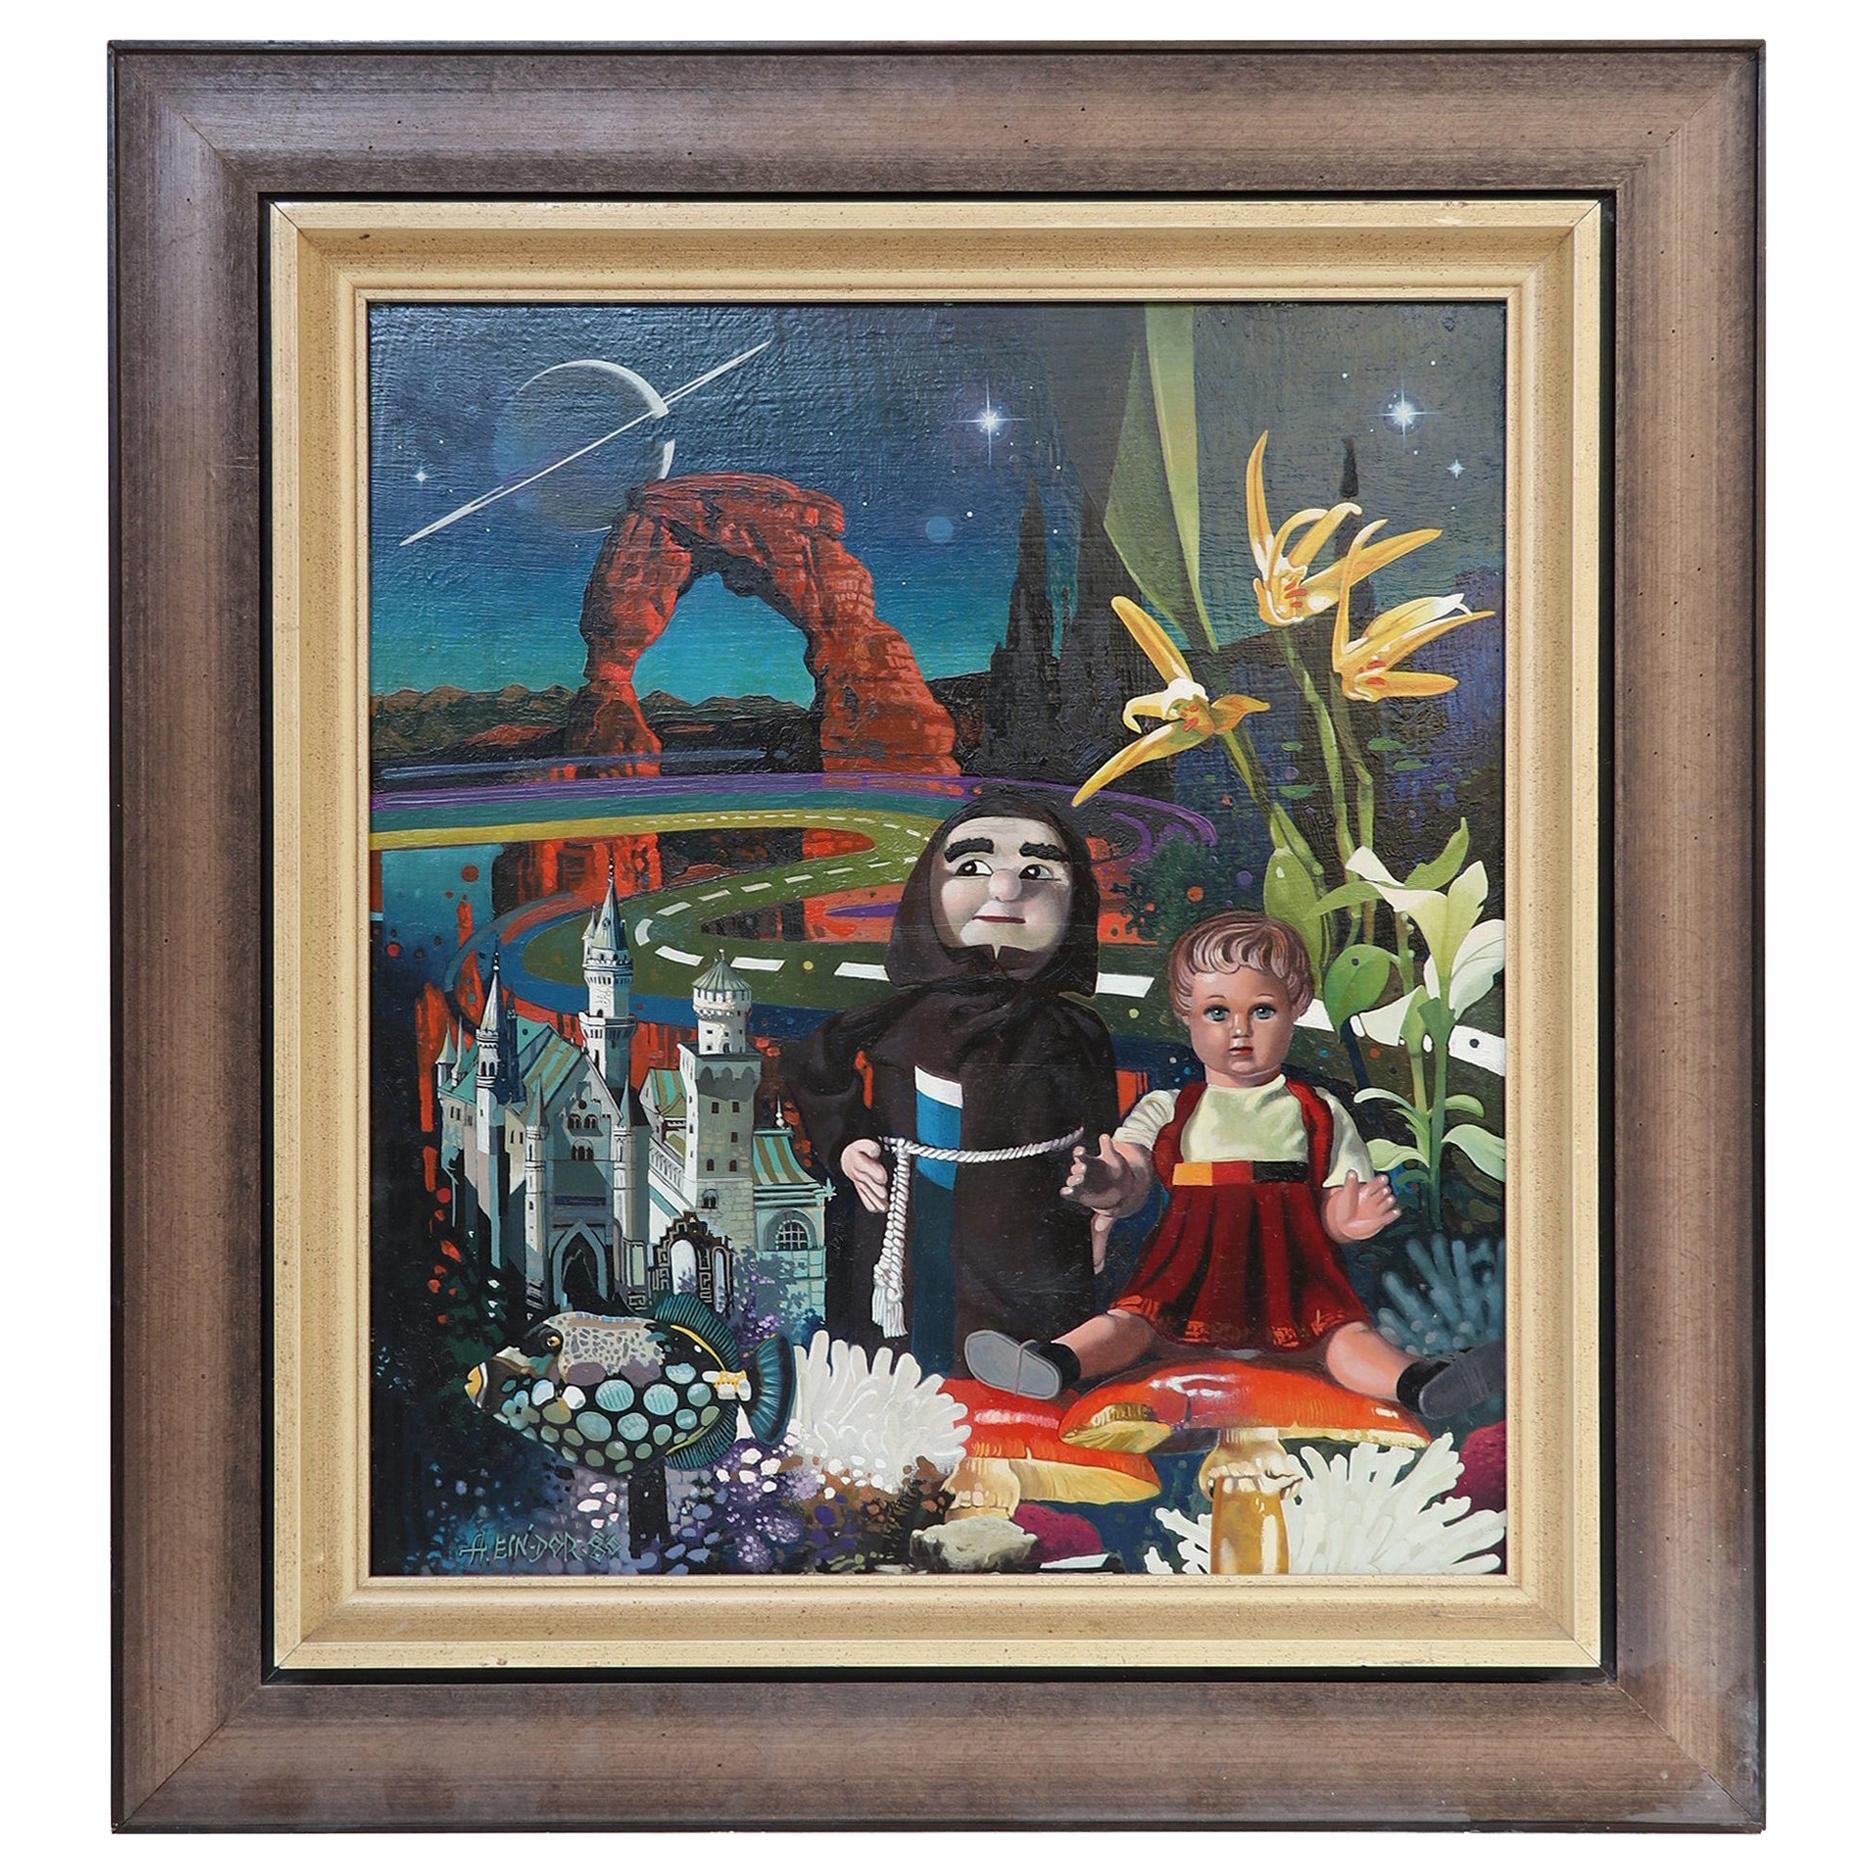 Post Surrealist Oil Painting "the Dolls" by Asher Ein Dor, Israel, 1980